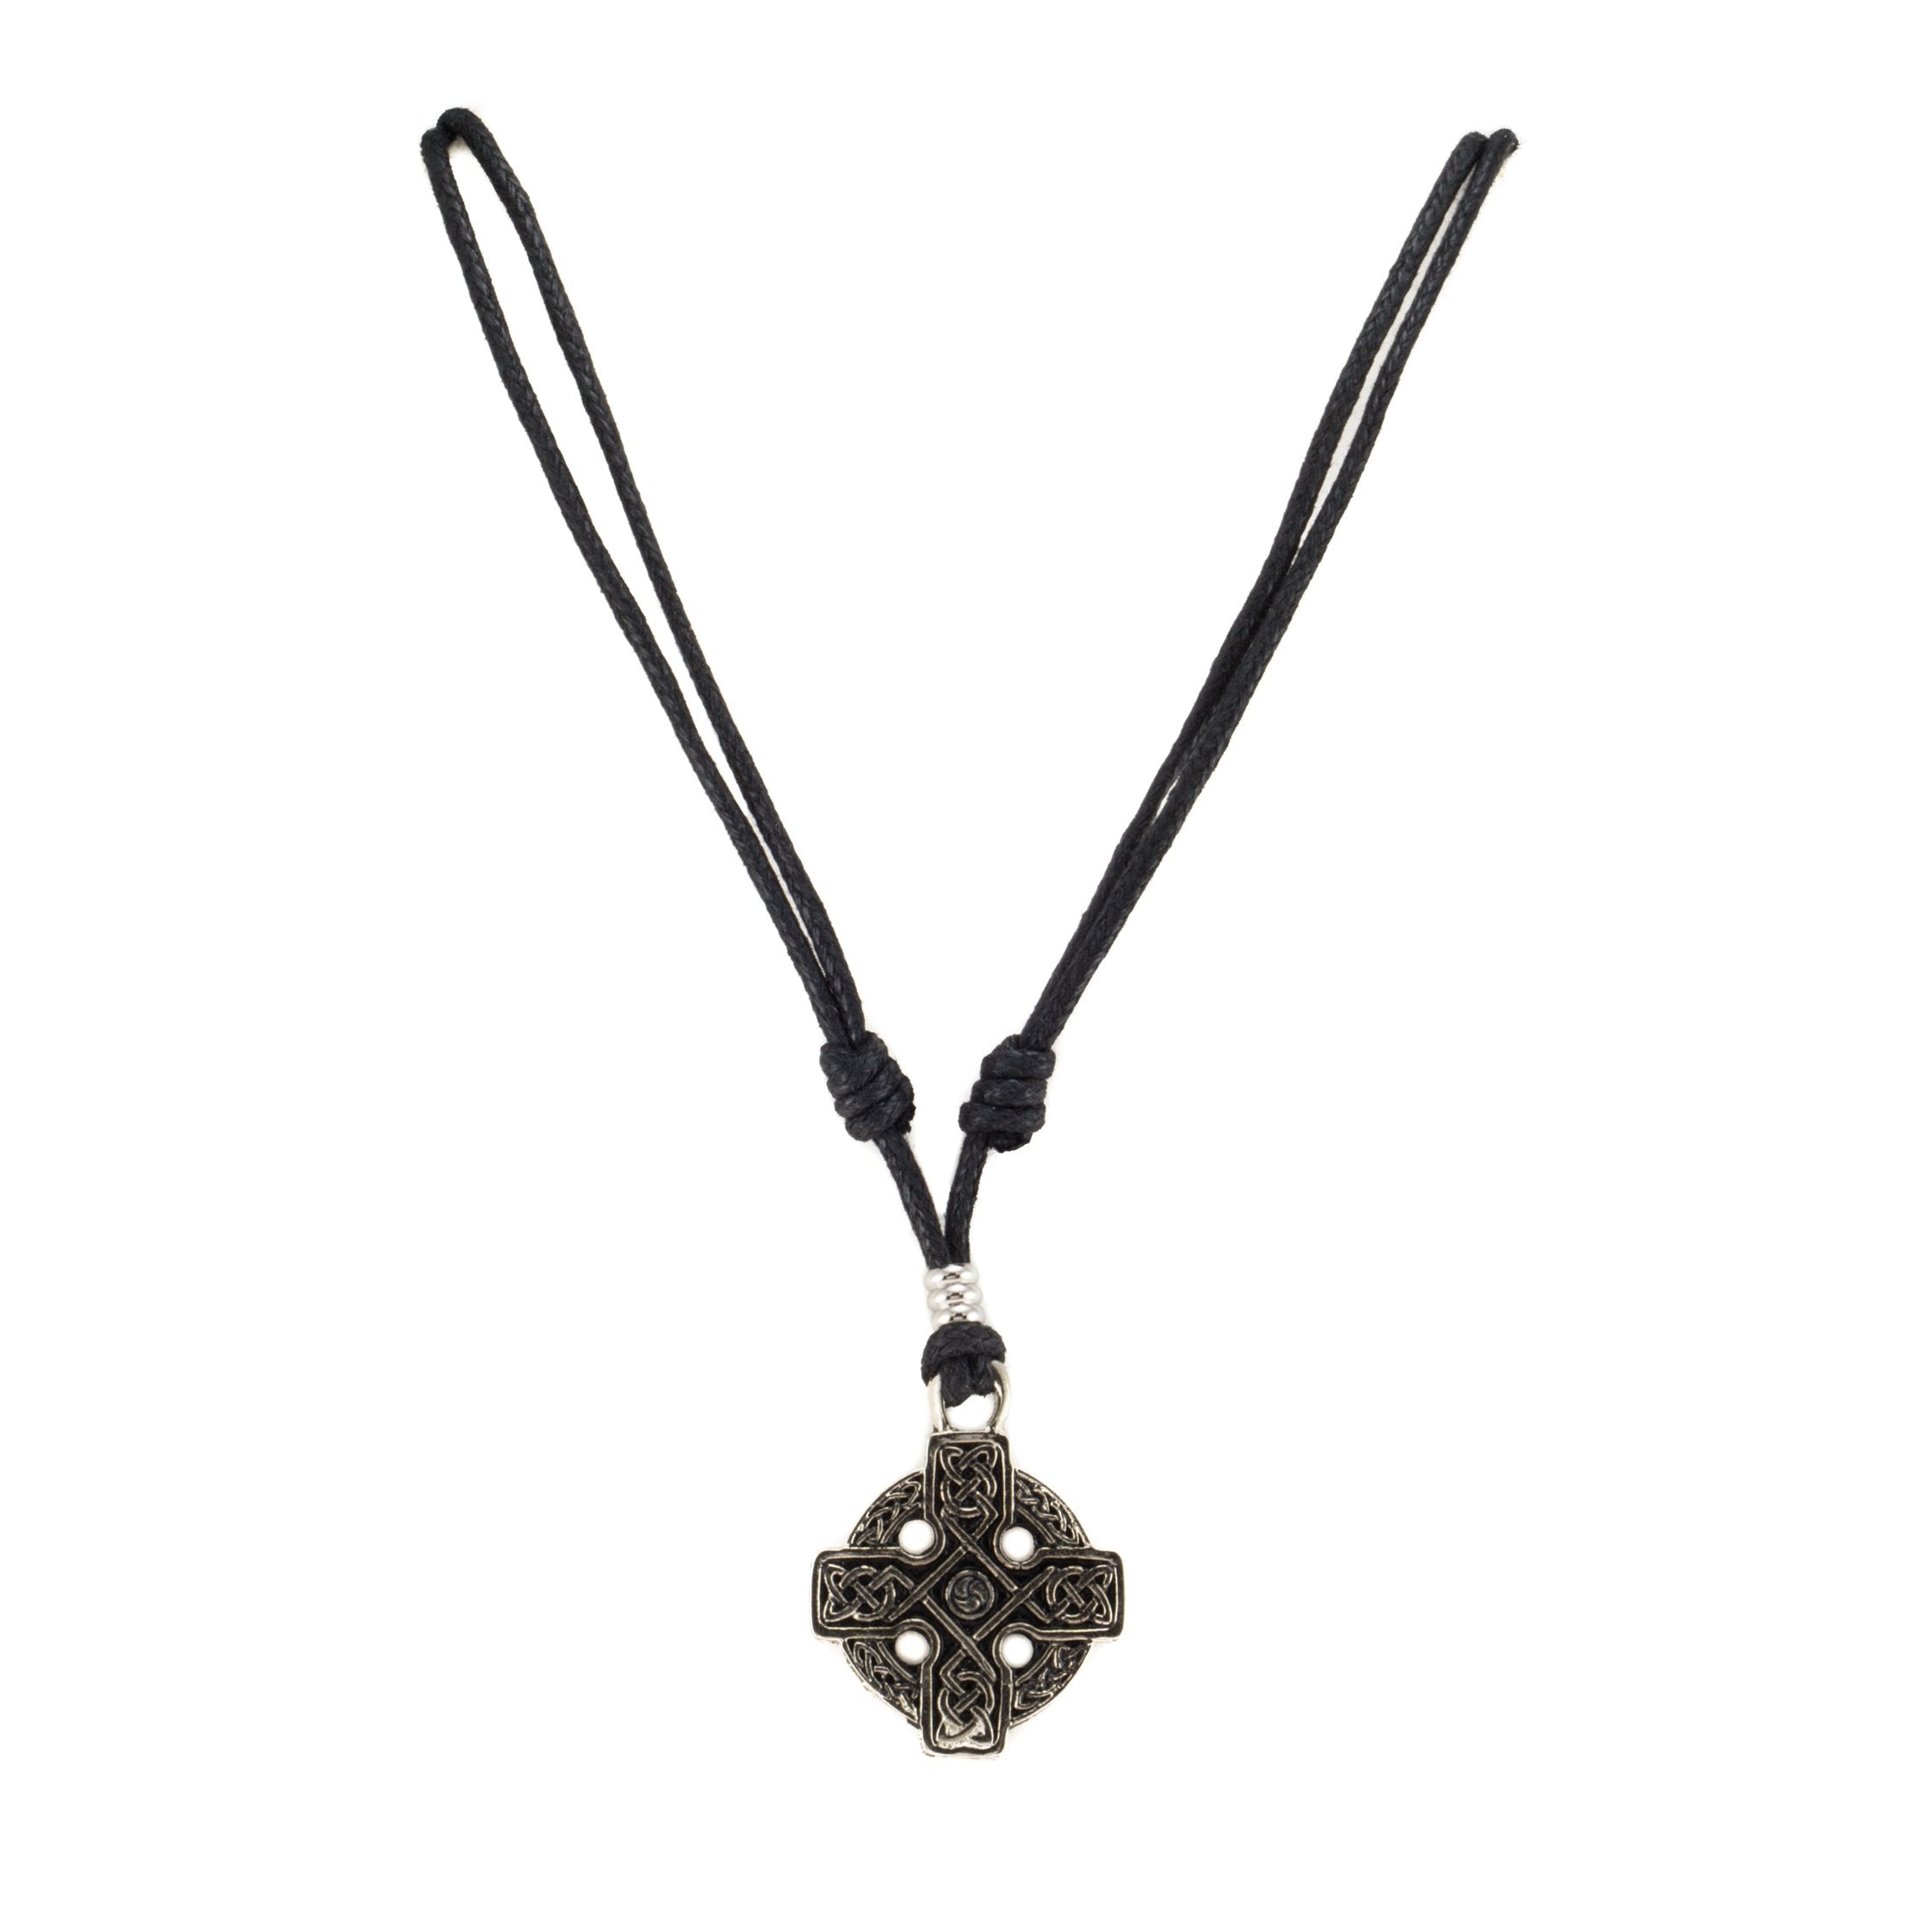 Celtic Cross Pendant on Adjustable Rope Necklace